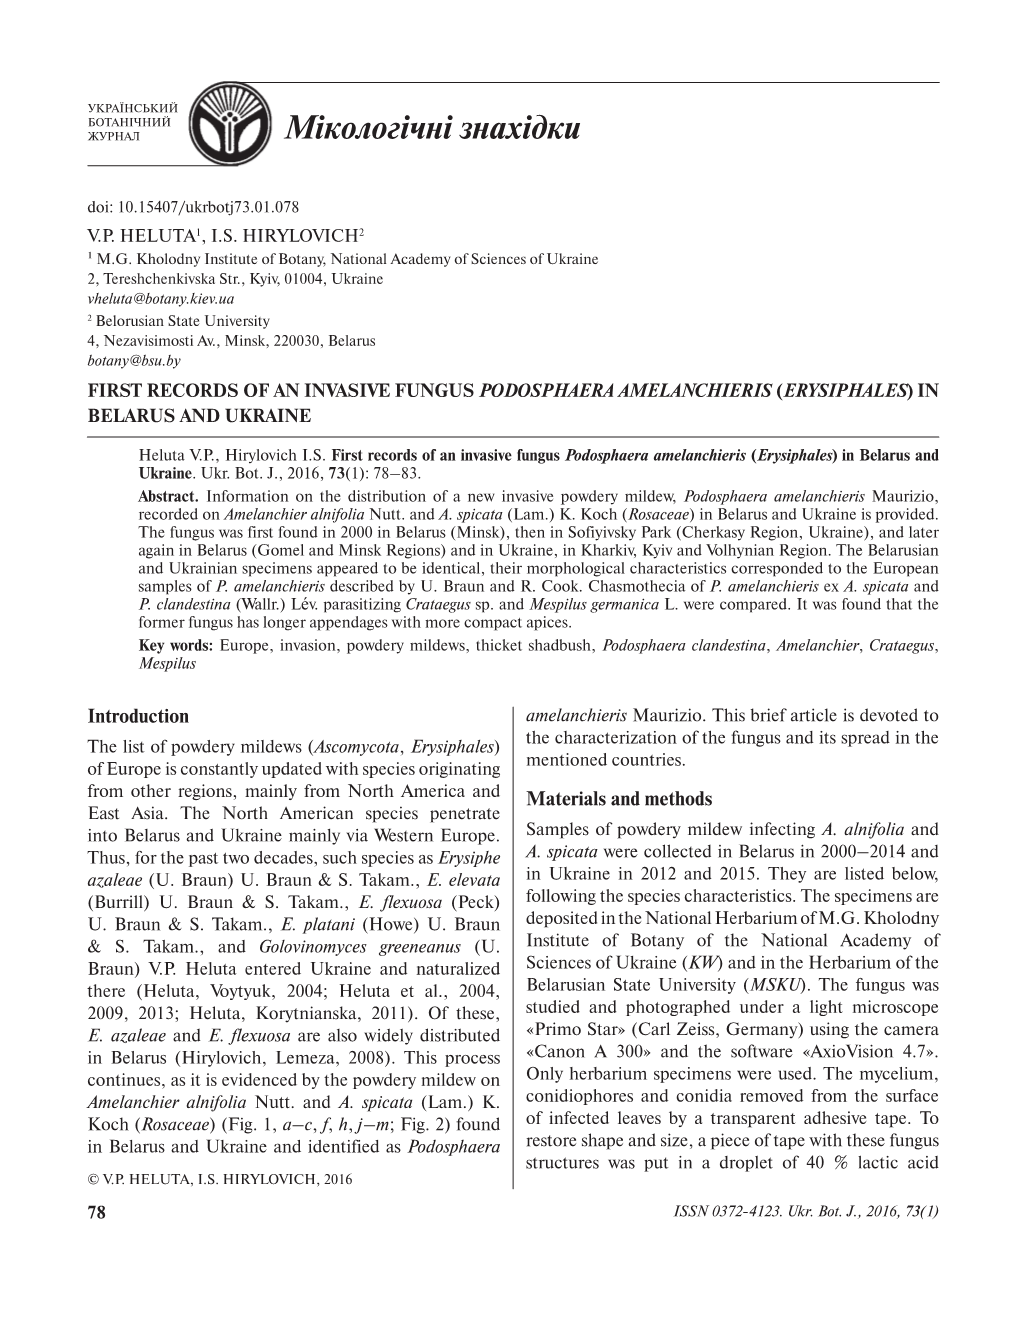 First Records of an Invasive Fungus Podosphaera Amelanchieris (Erysiphales) in Belarus and Ukraine